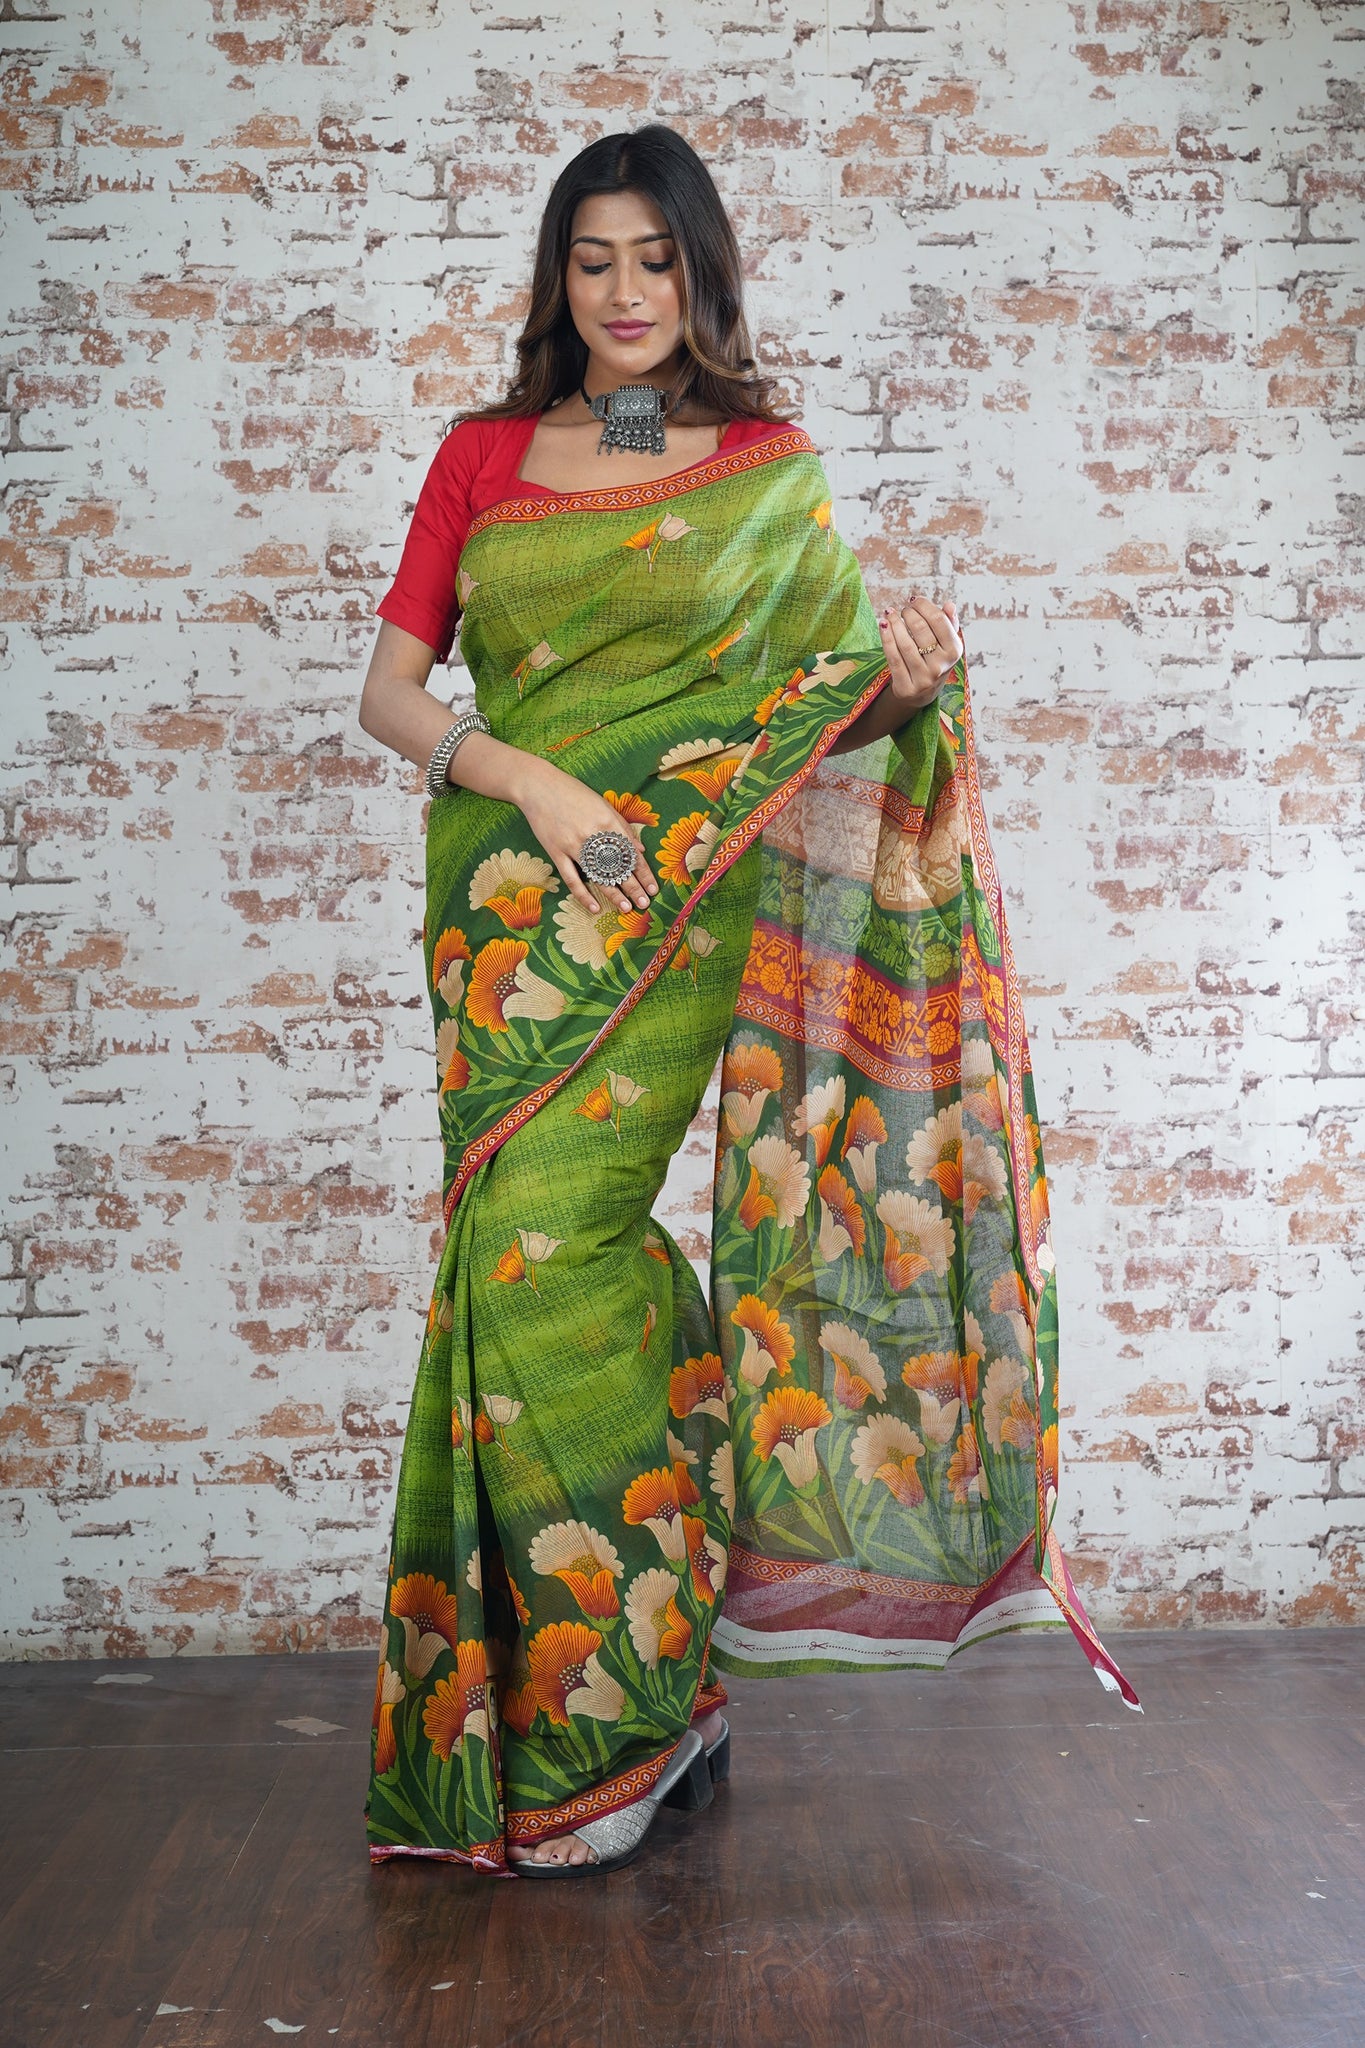 Cotton Printed Saree in Green Color with Stripes and Flower Design with Orange and White Flowers